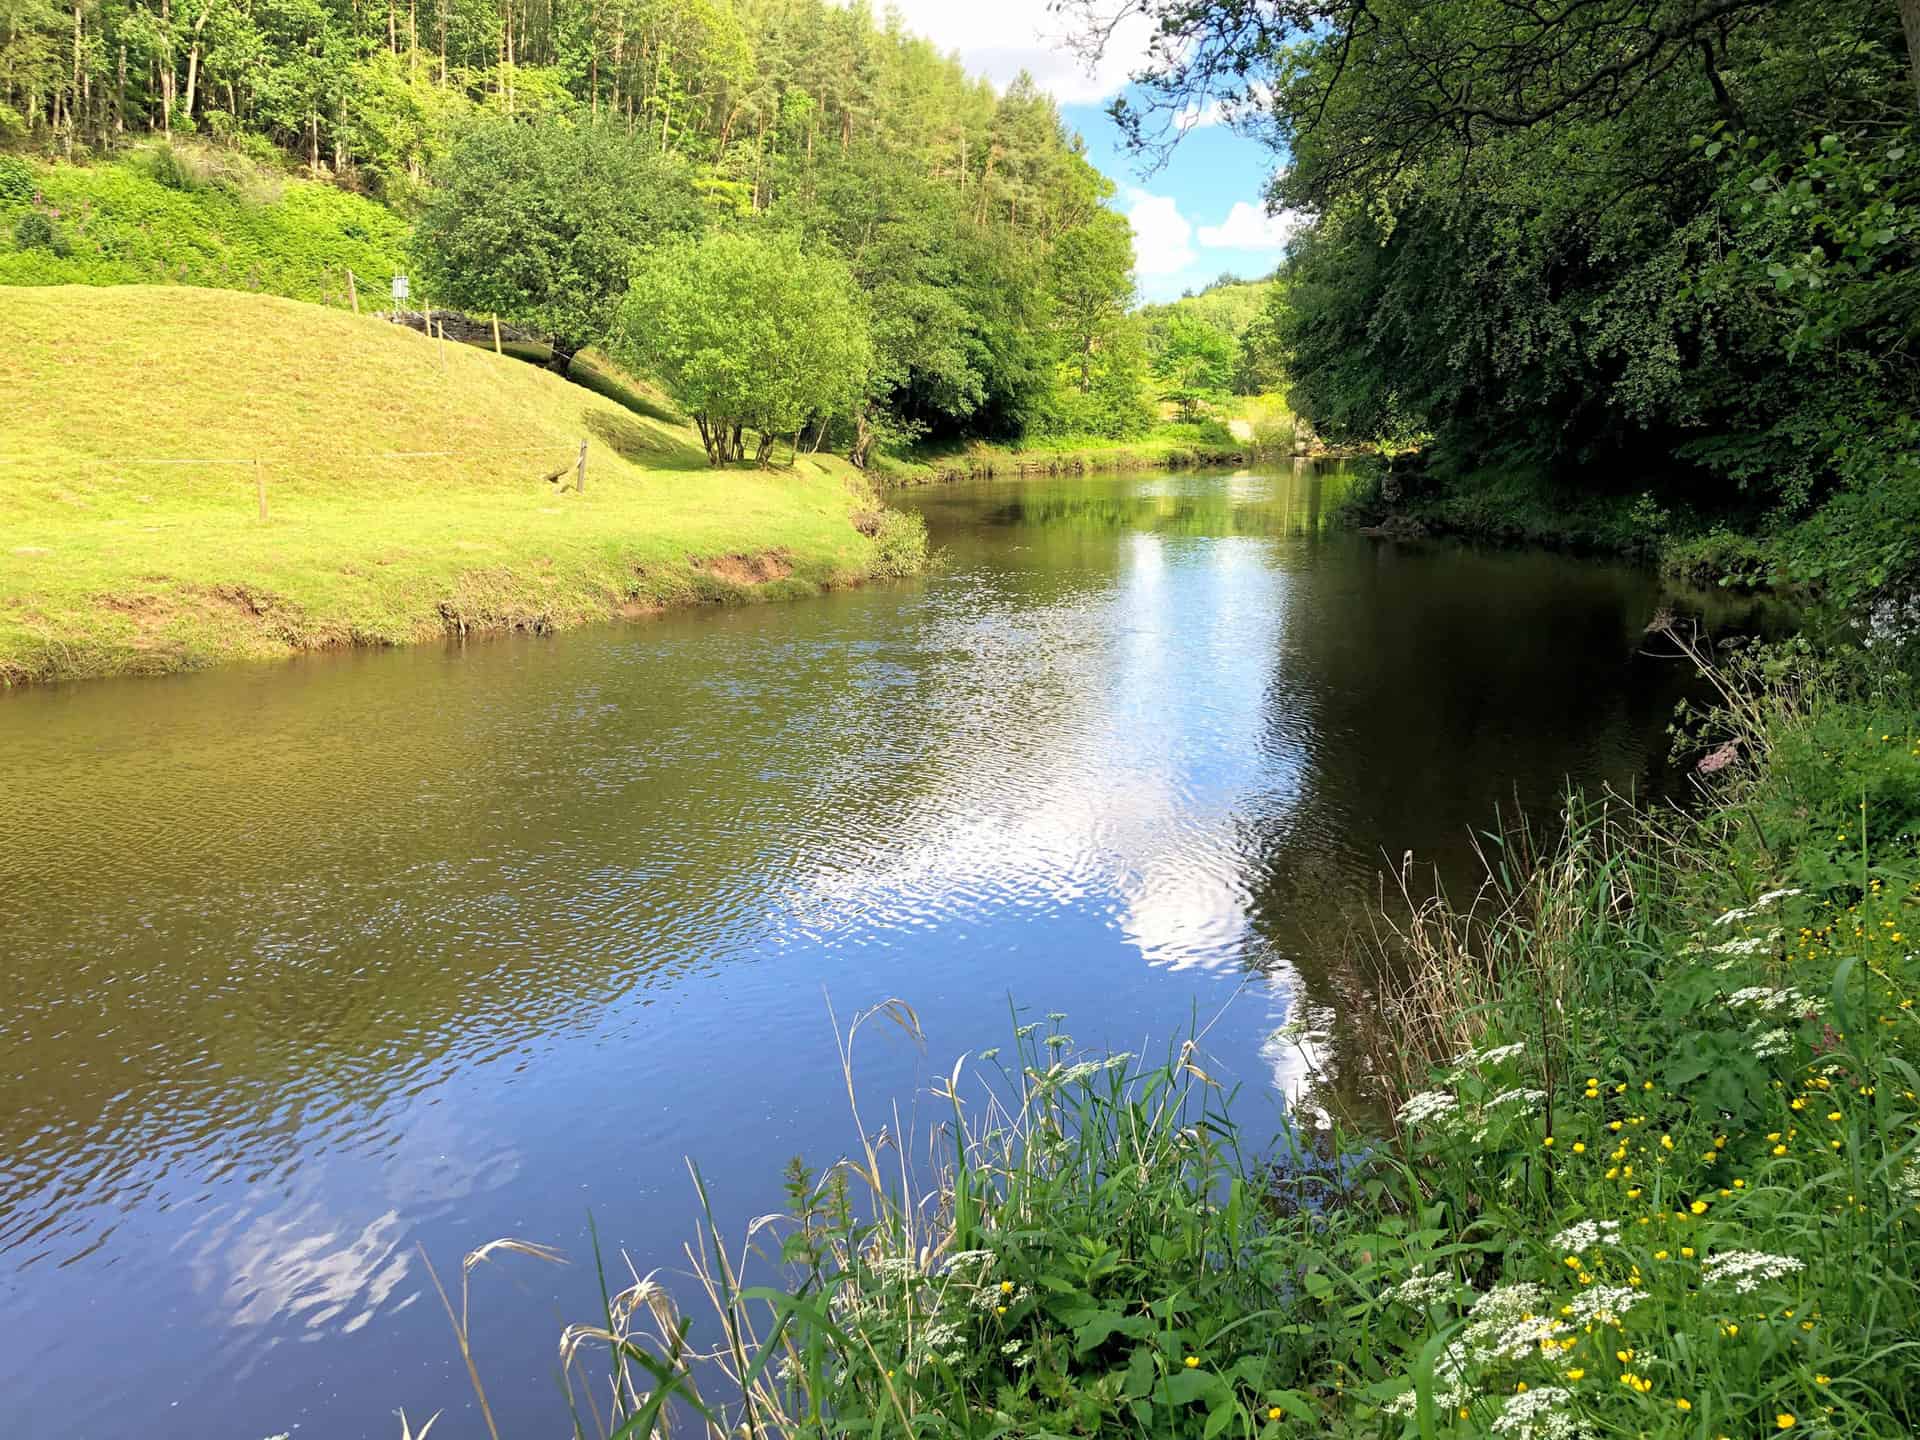 The tranquil expanse of the River Esk along the Esk Valley Walk.